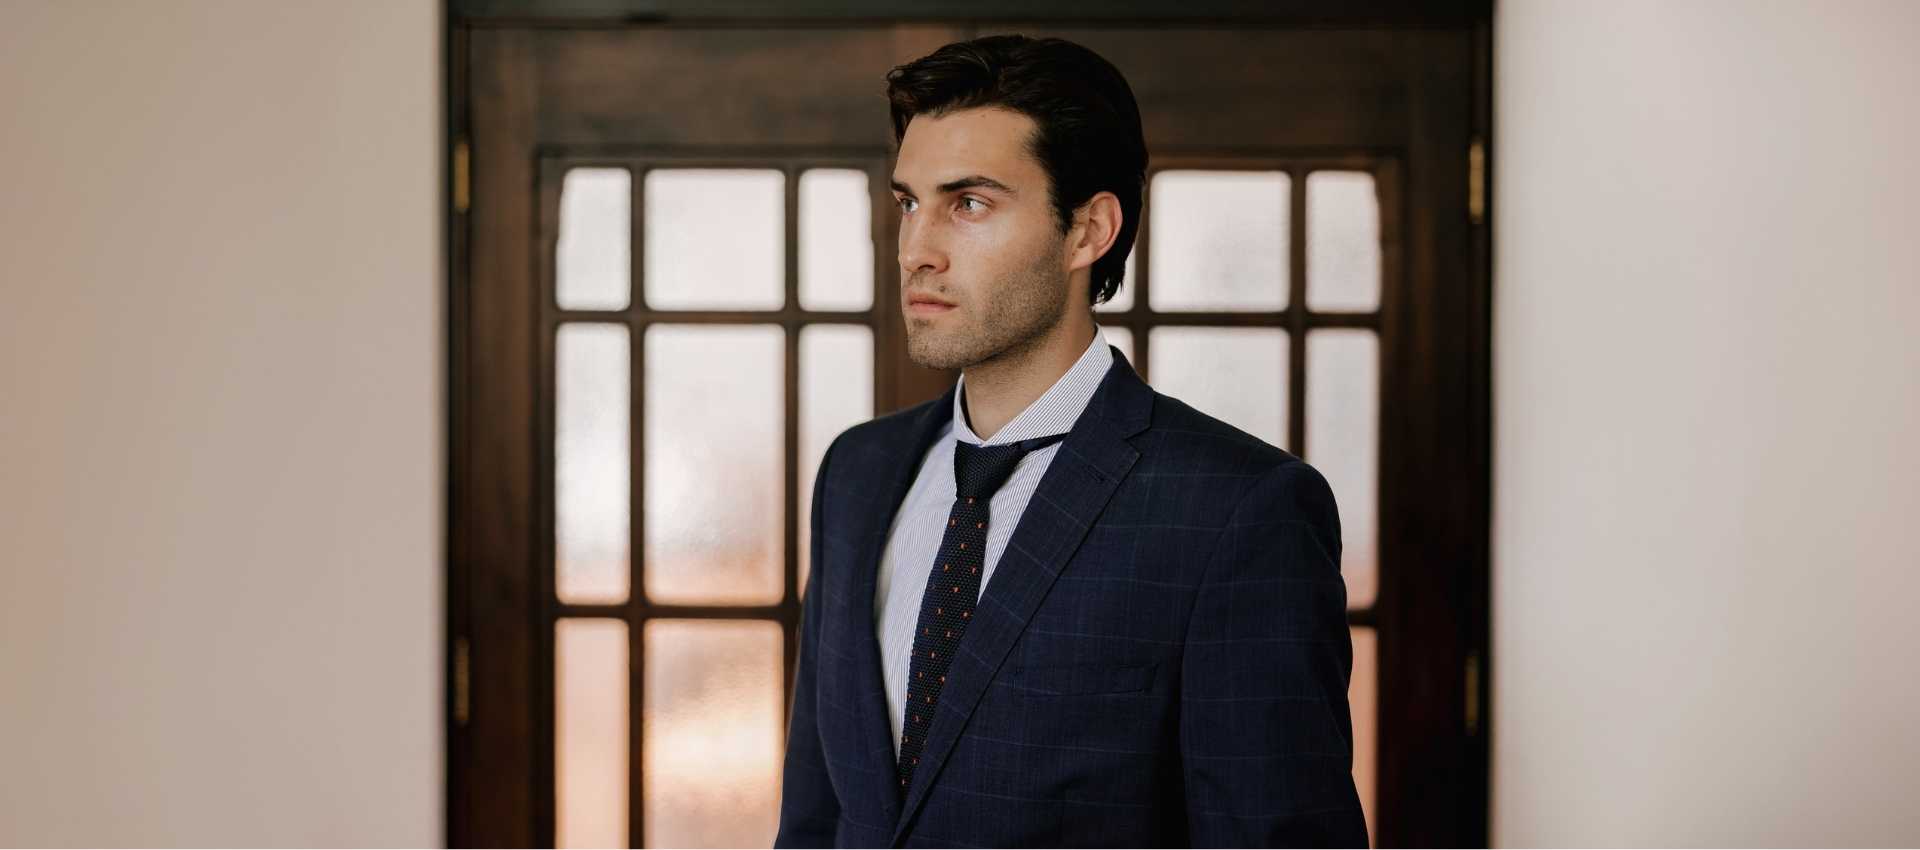 Collection of all Best Selling Dress Shirts for Men from Dandy & Son. Image of a man wearing a Extreme Cutaway Collar Shirt from Dandy & Son with a dark tie and suit.